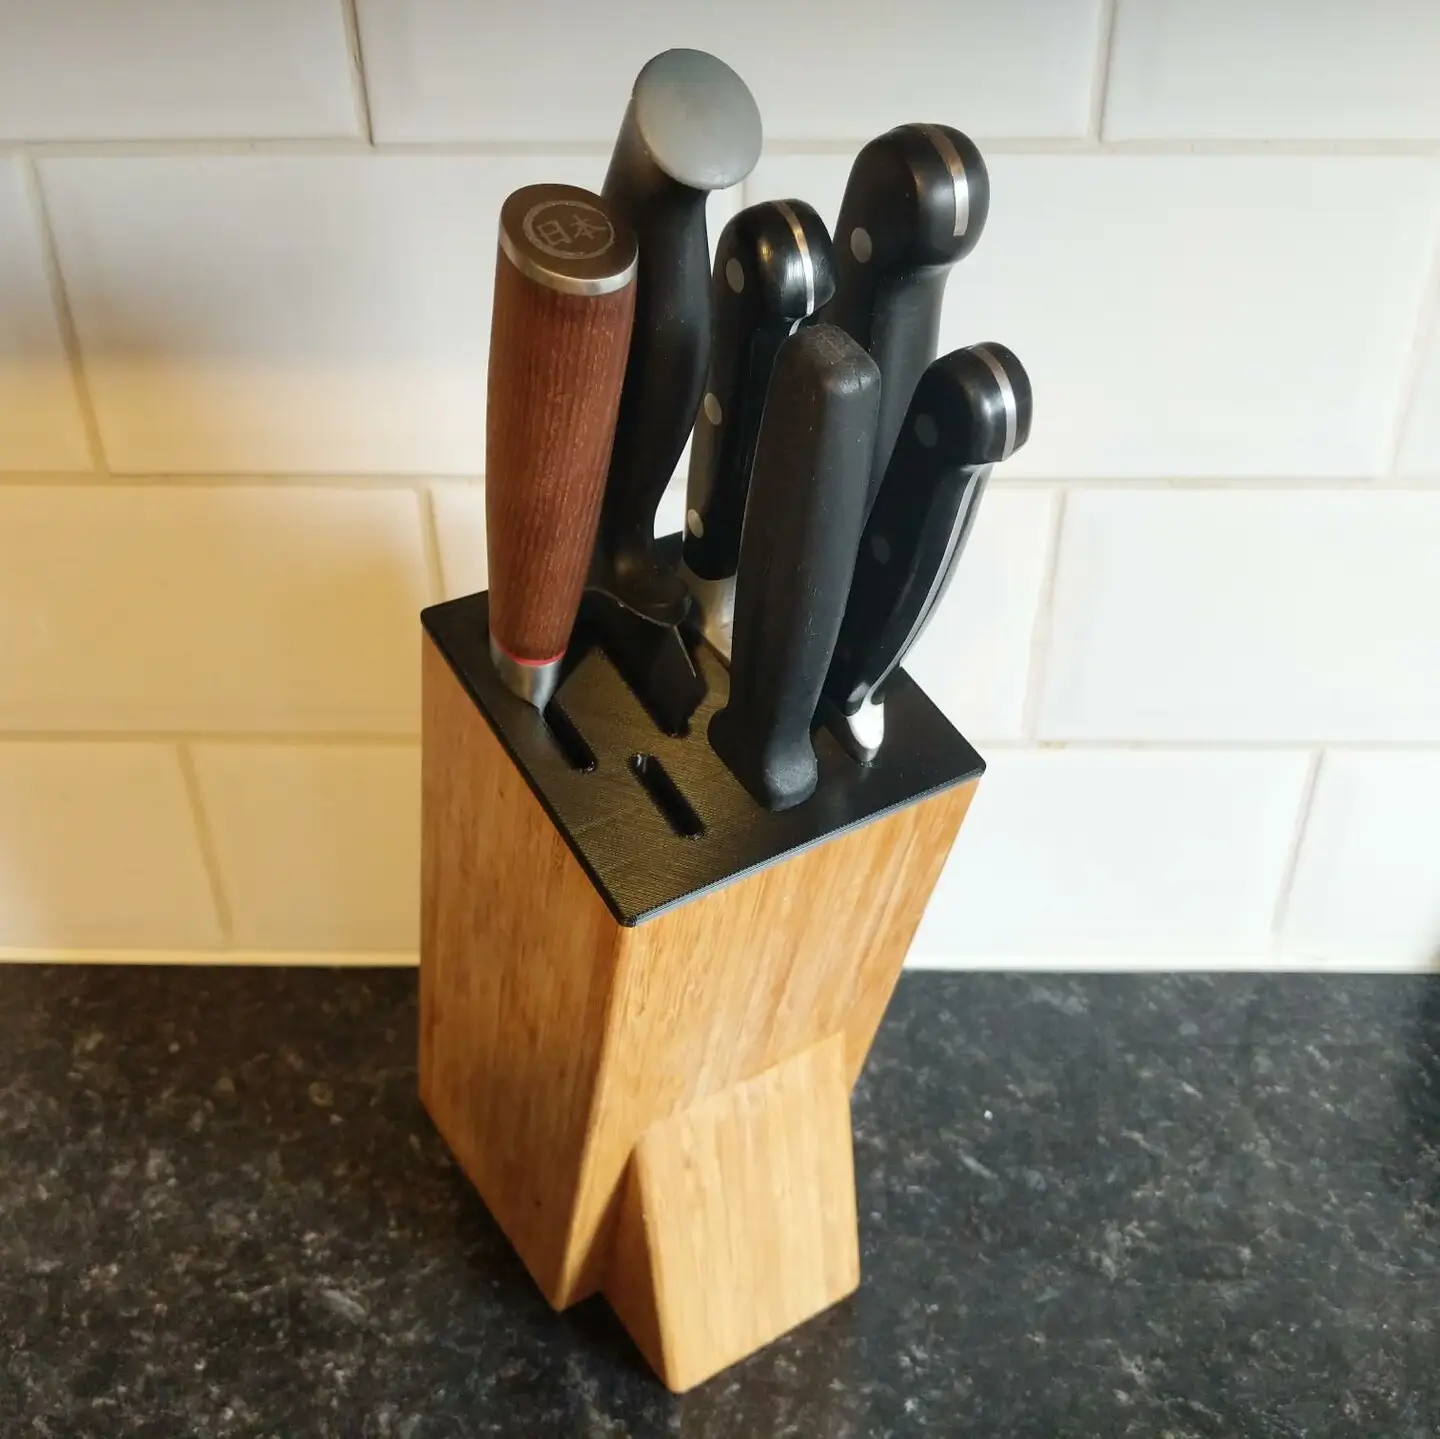 A bamboo block with a black 3D printed plastic insert in the top. It has a
variety of long and short slots into which knives are inserted